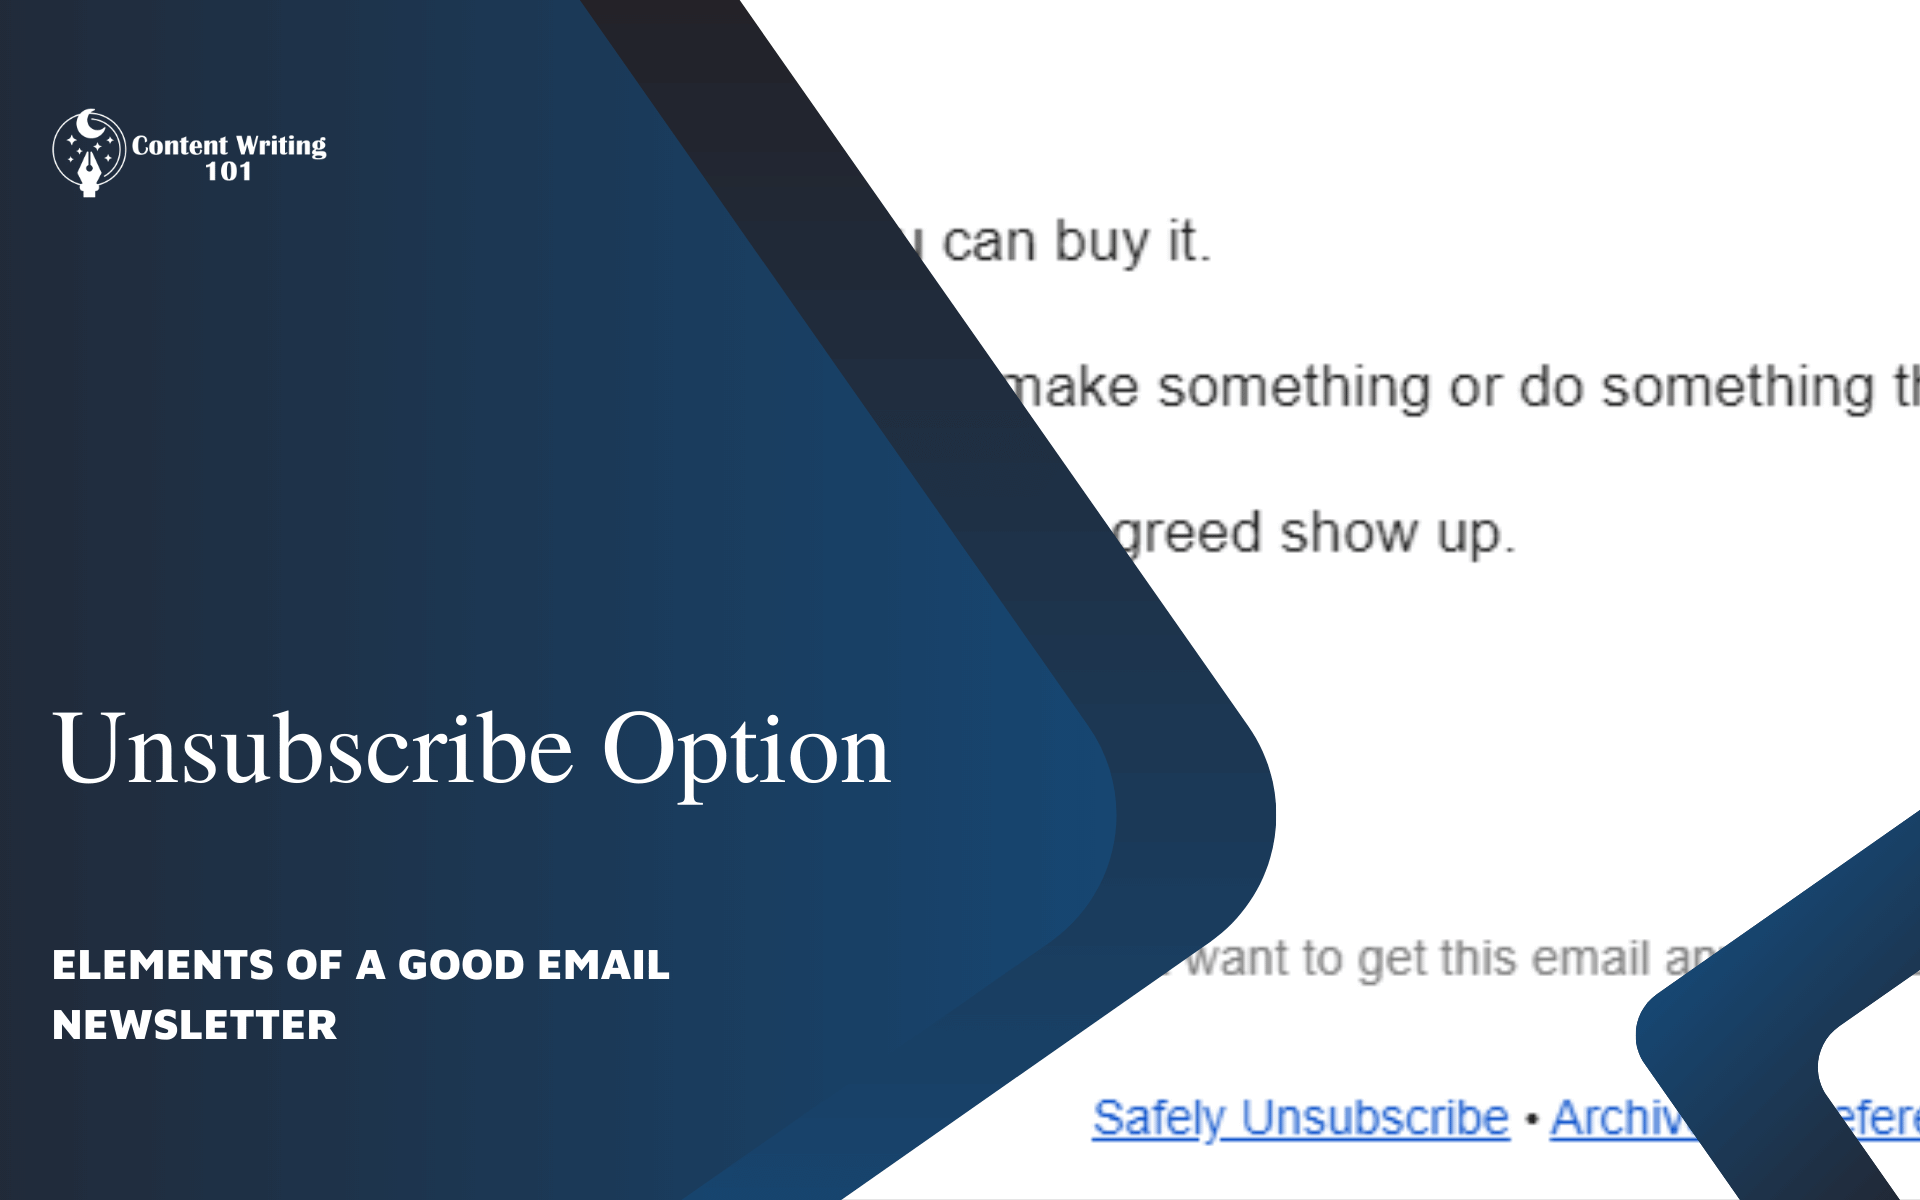 11. Unsubscribe Option